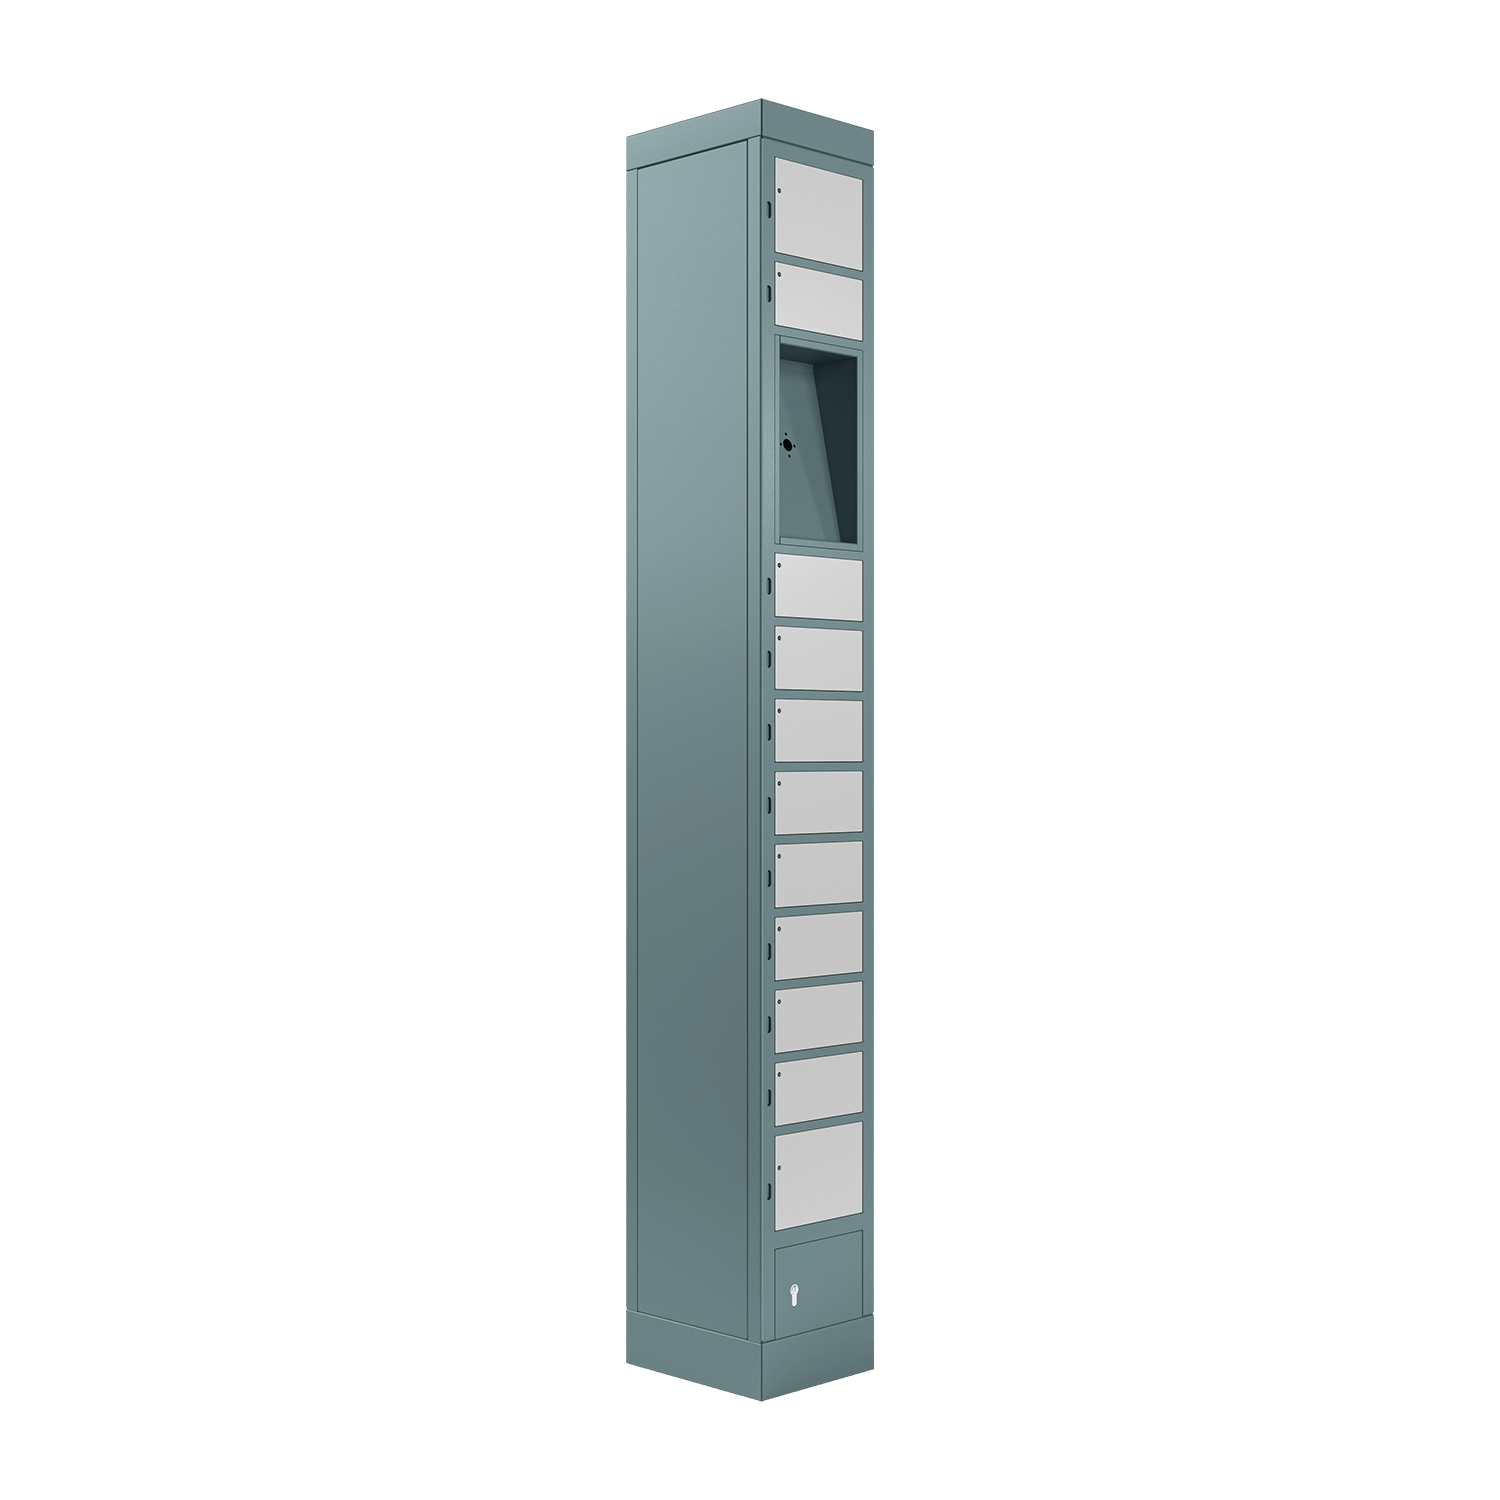 locker compartment system, size S, with 11 compartments, space for user terminal, left view